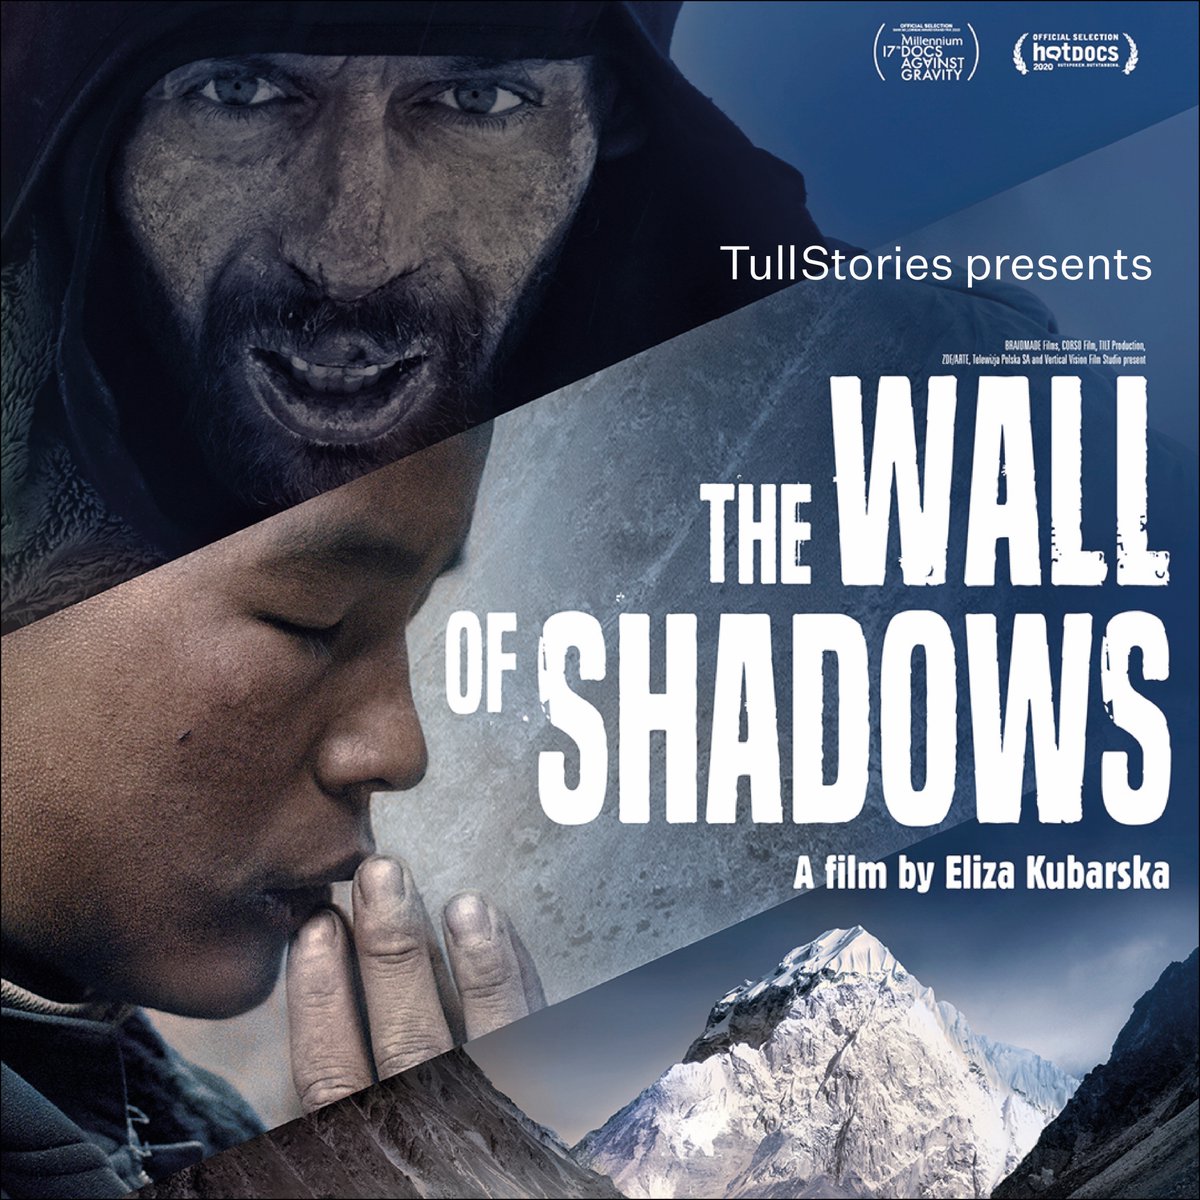 FREE TO WATCH ONLINE ALERT! Eliza Kubarska's incredible documentary THE WALL OF SHADOWS is now available free-to-watch via Amazon Freevee! Happy viewing! bit.ly/thewallofshado…